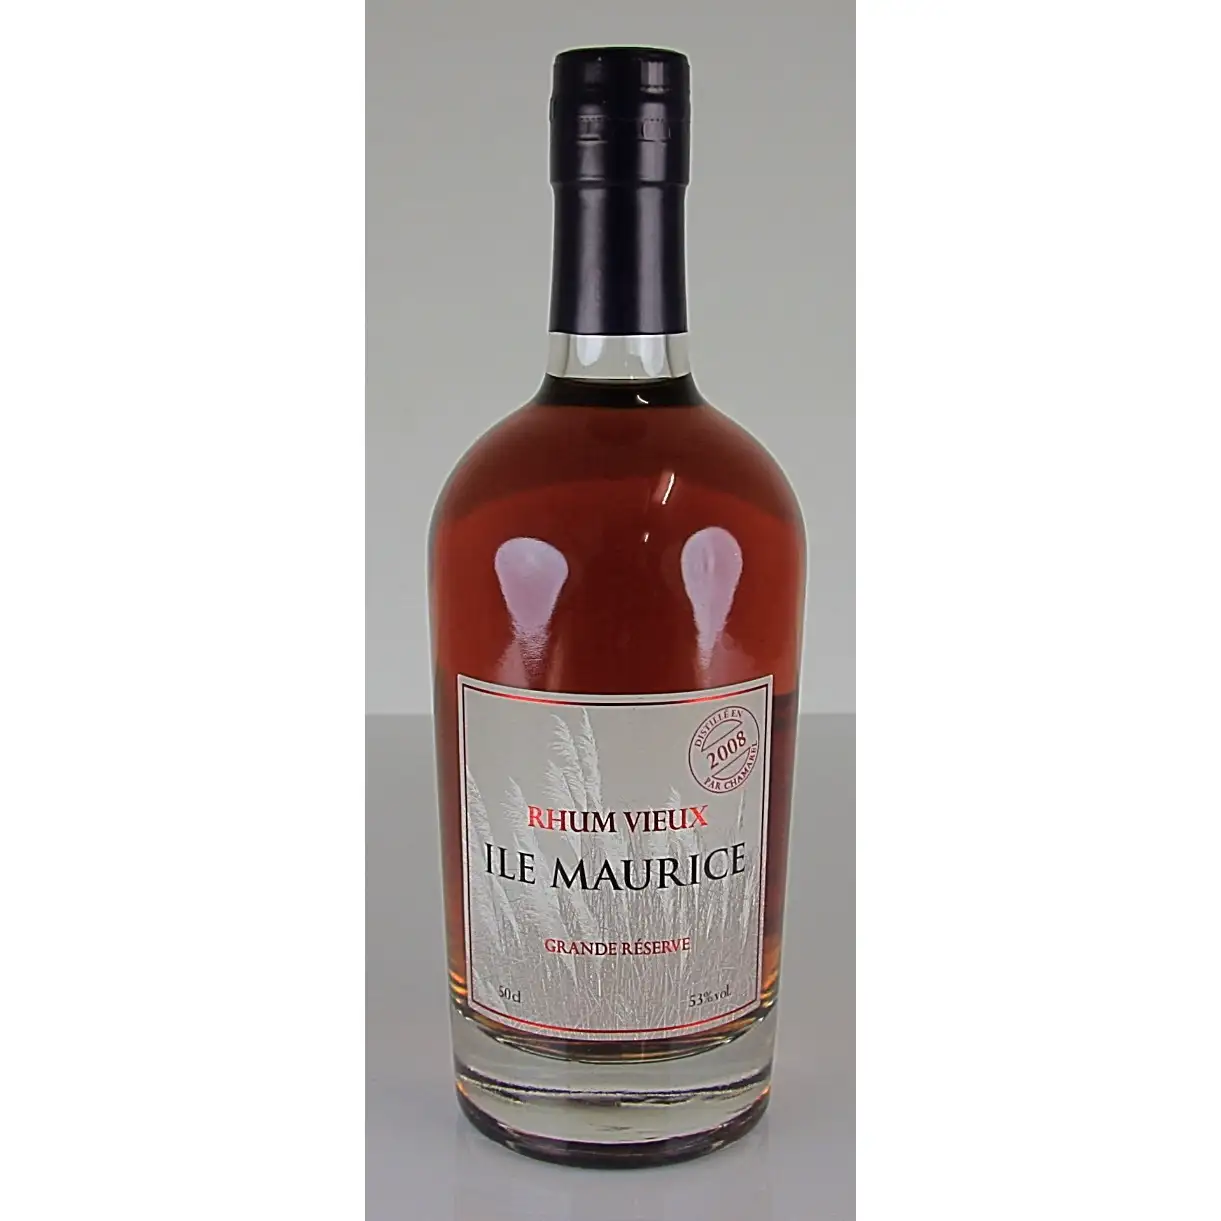 Image of the front of the bottle of the rum Rhum Vieux Ile Maurice